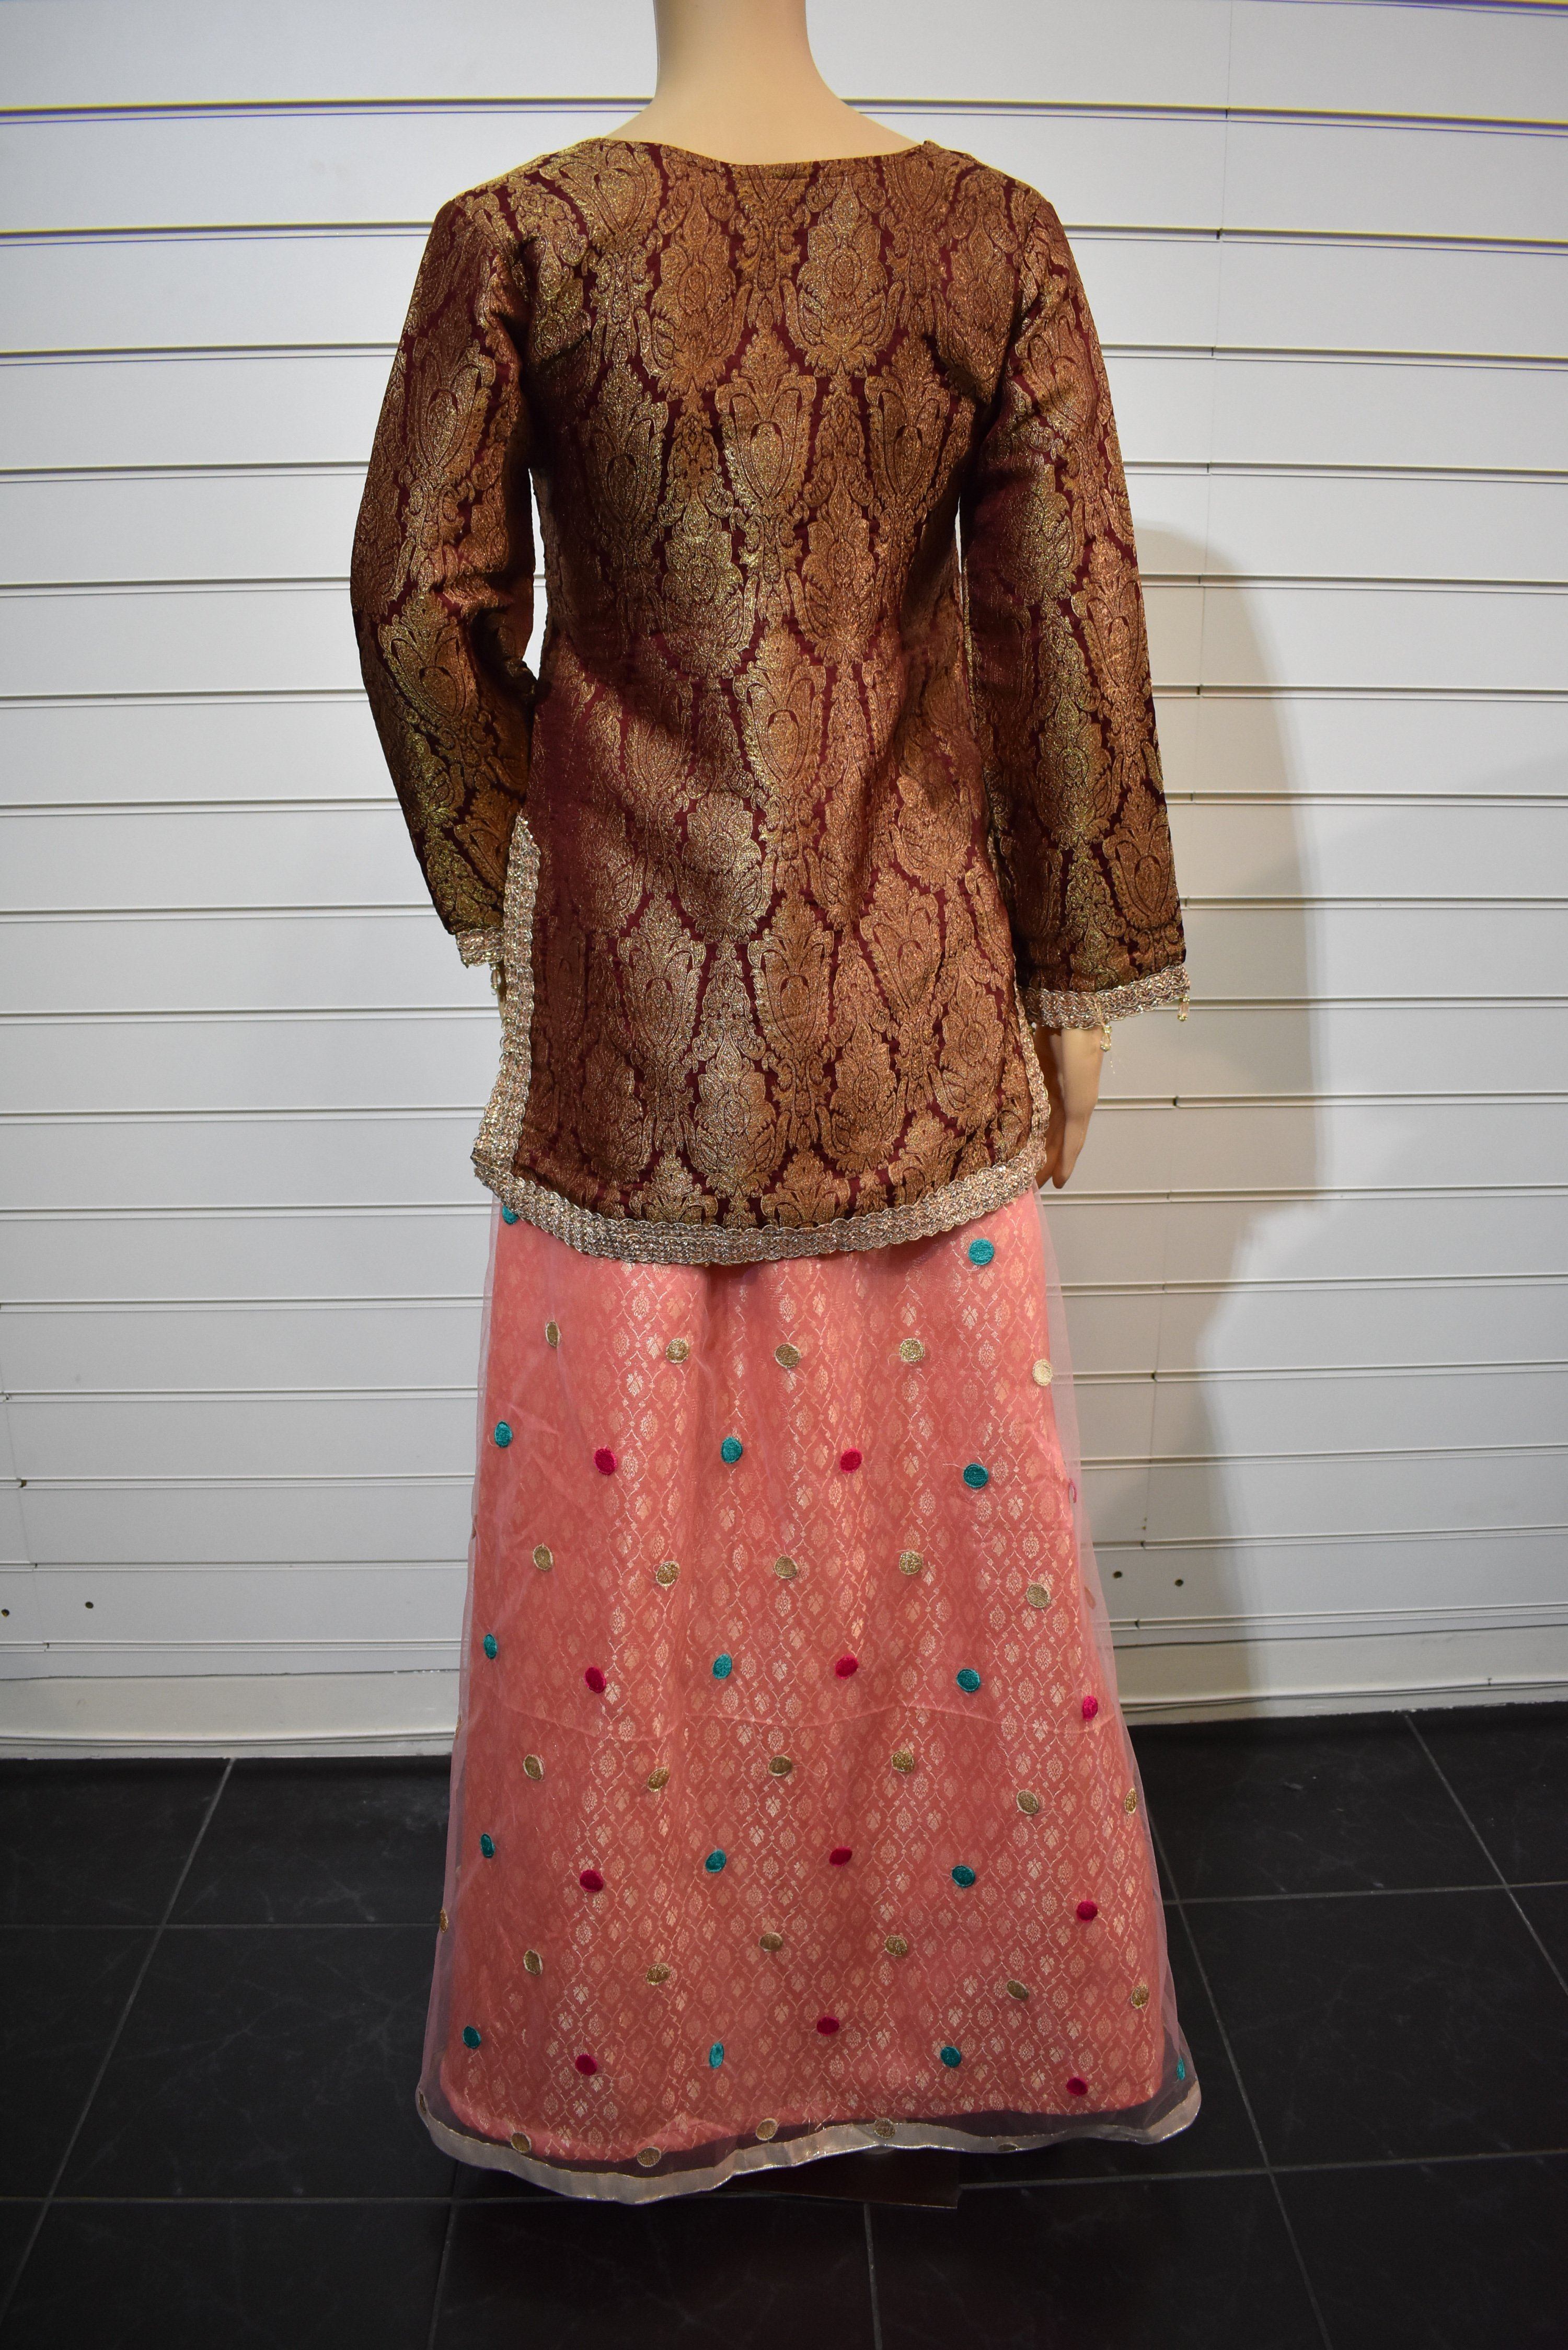 Stunning Maroon and Pink Embroidered Lengha Outfit - Desi Posh